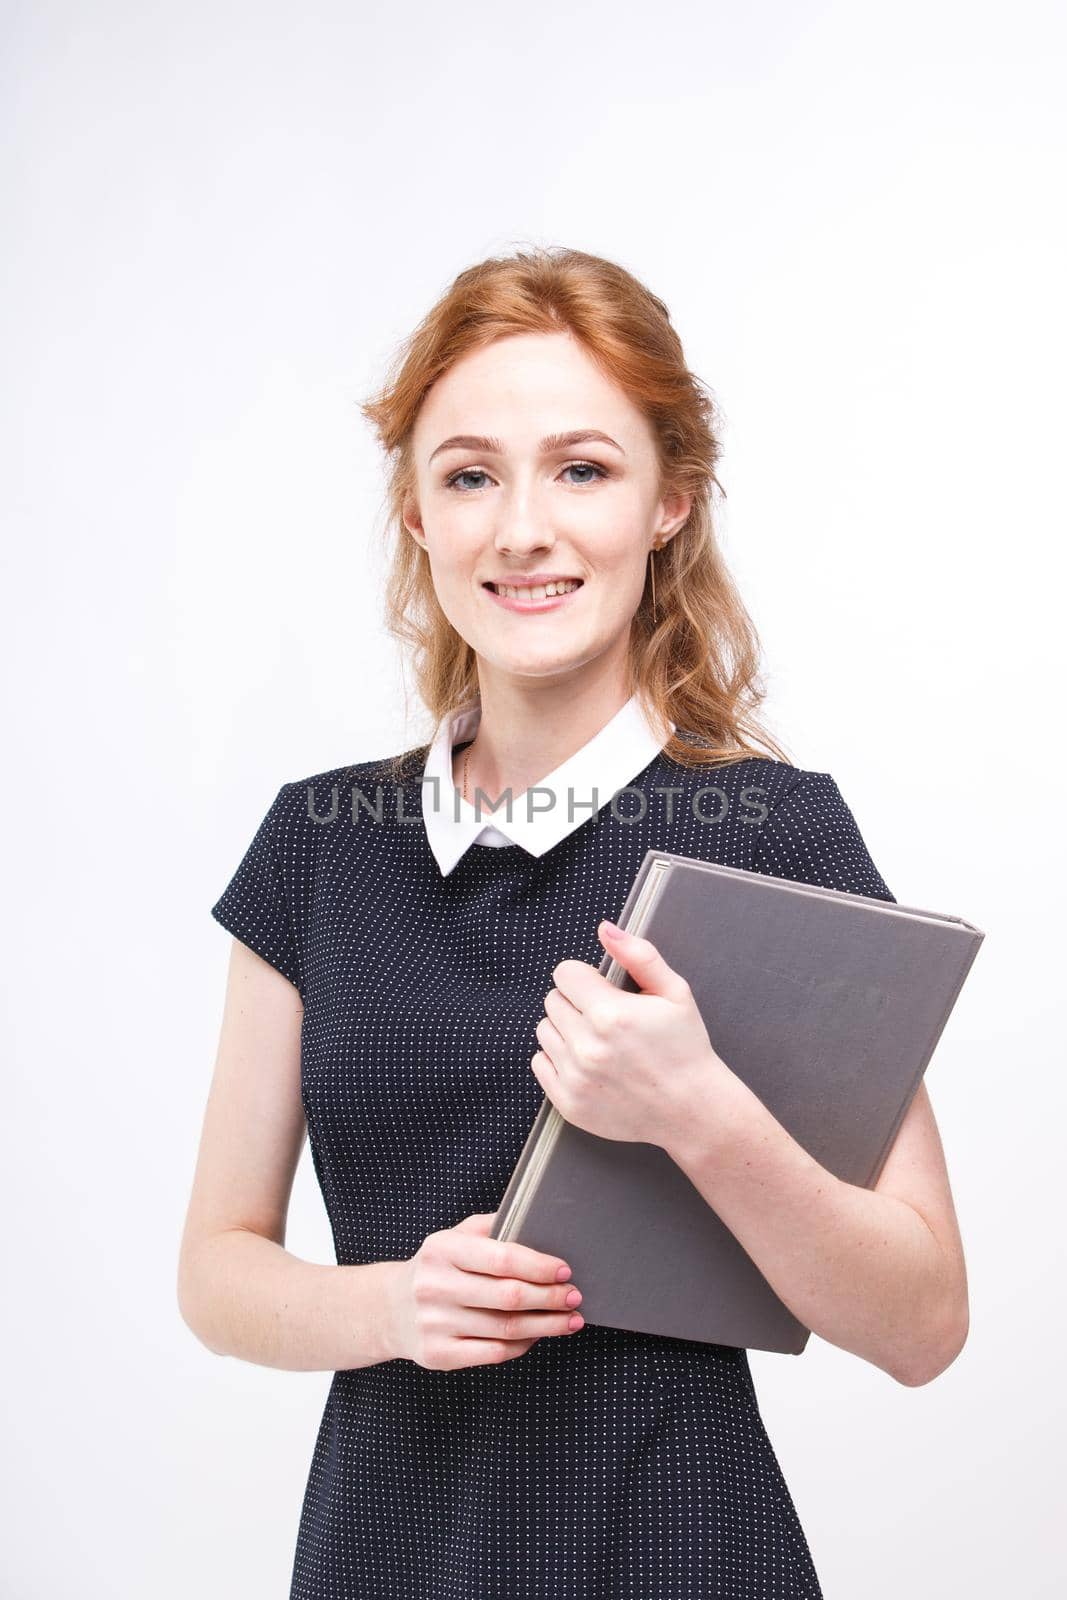 Beautiful girl with red hair and gray book in hands dressed in black dress on white isolated background by Tomashevska